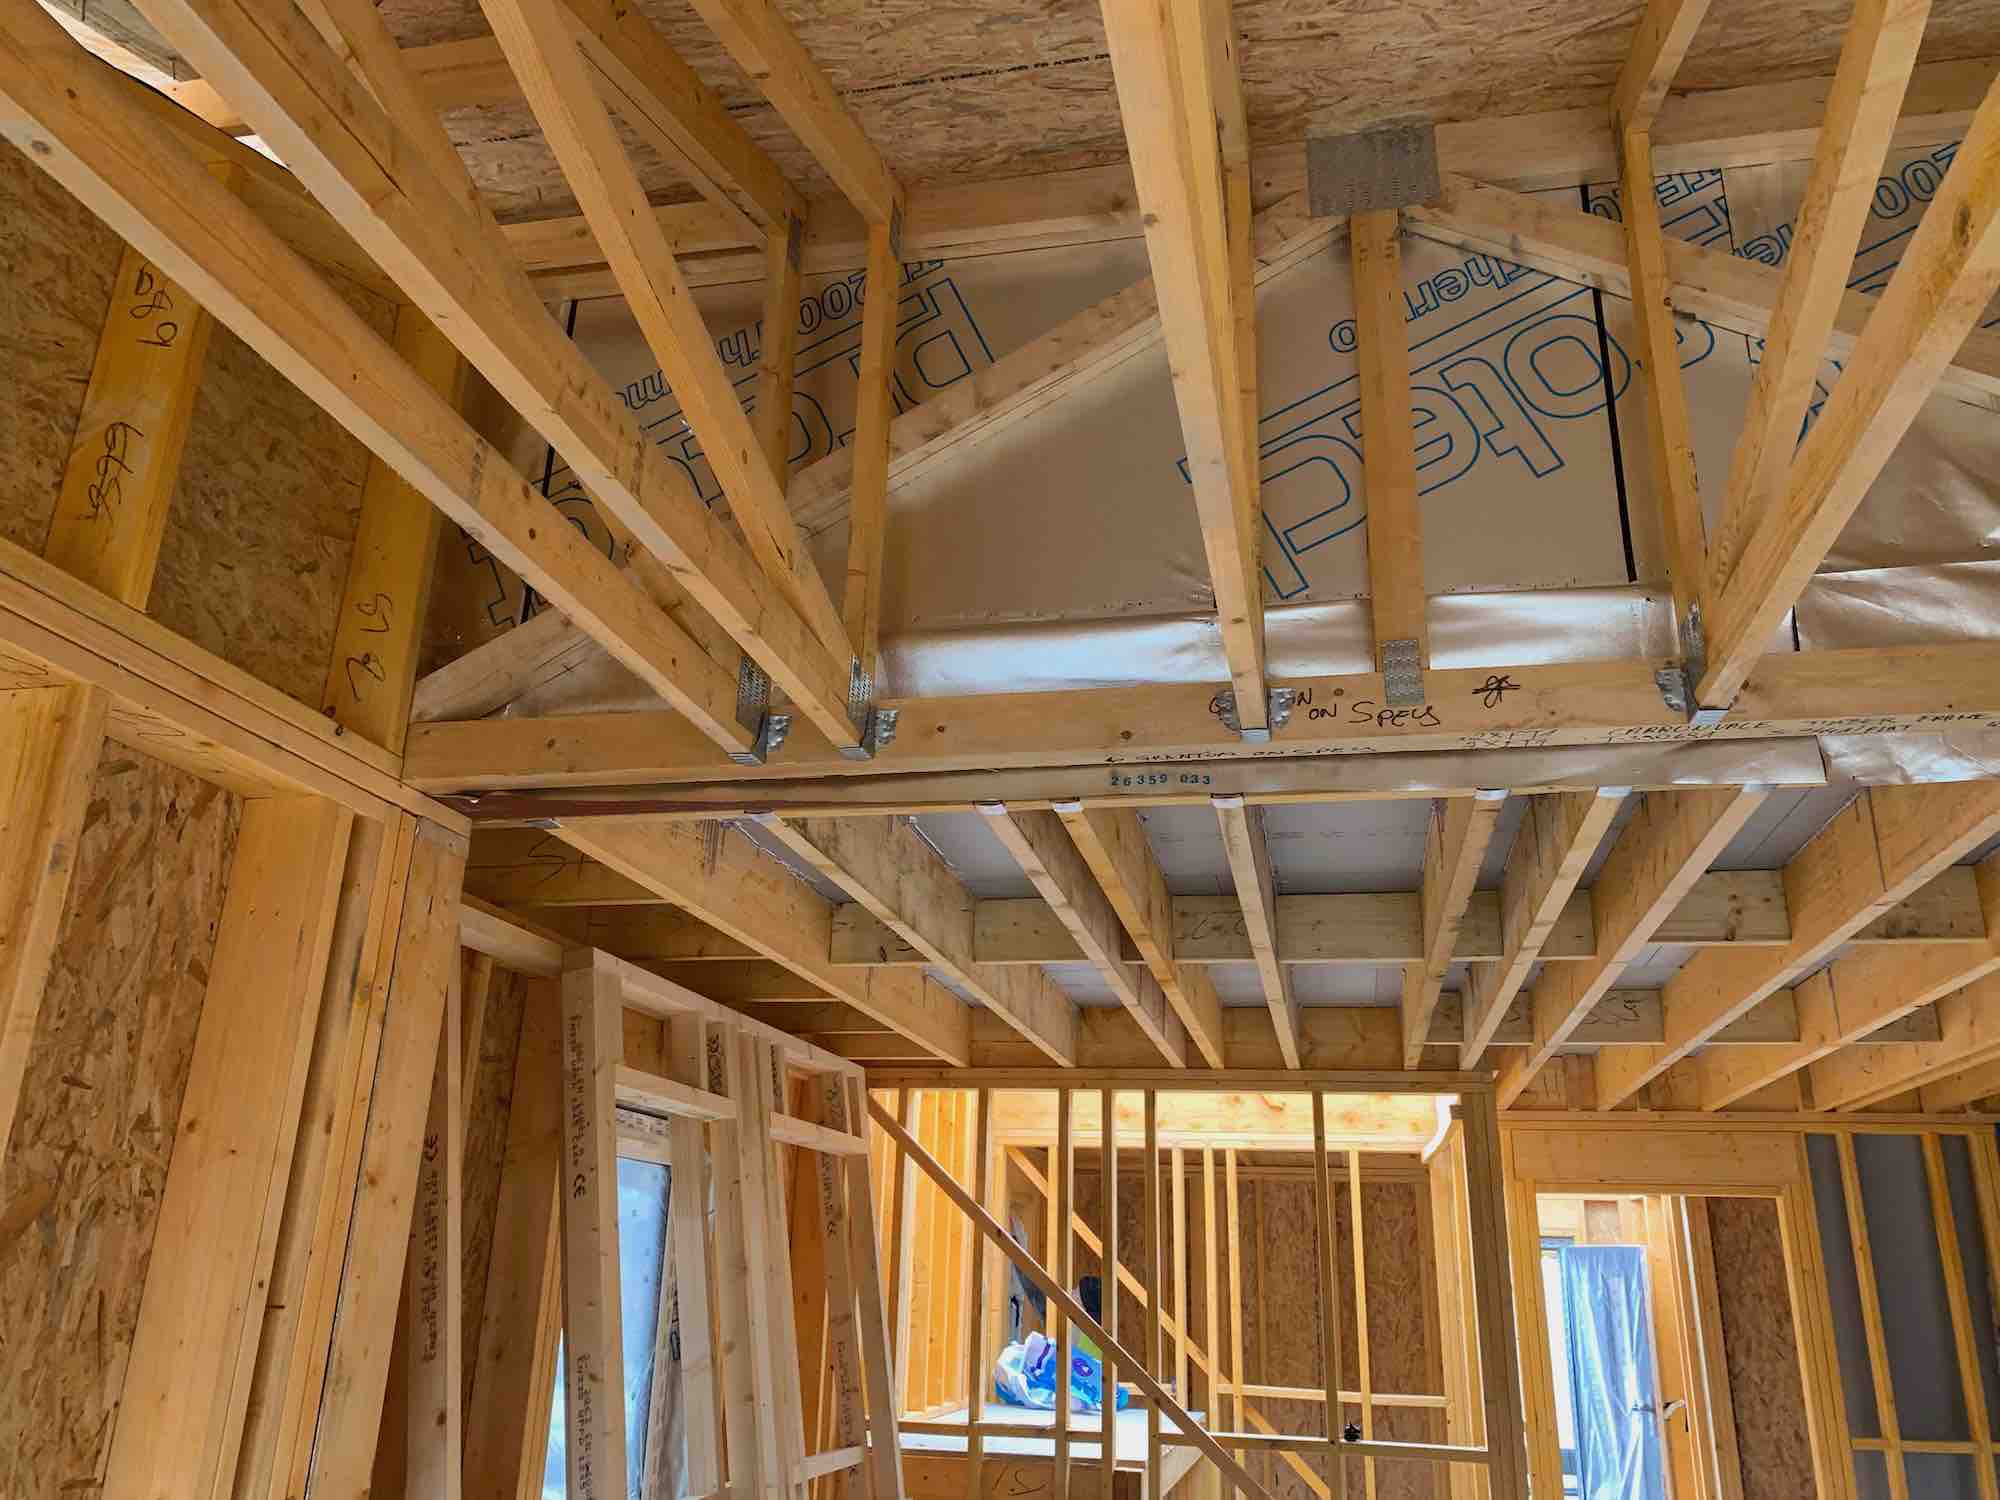 Internal photo of errected timber frame showing mid-floor, trusses, internal and external walls